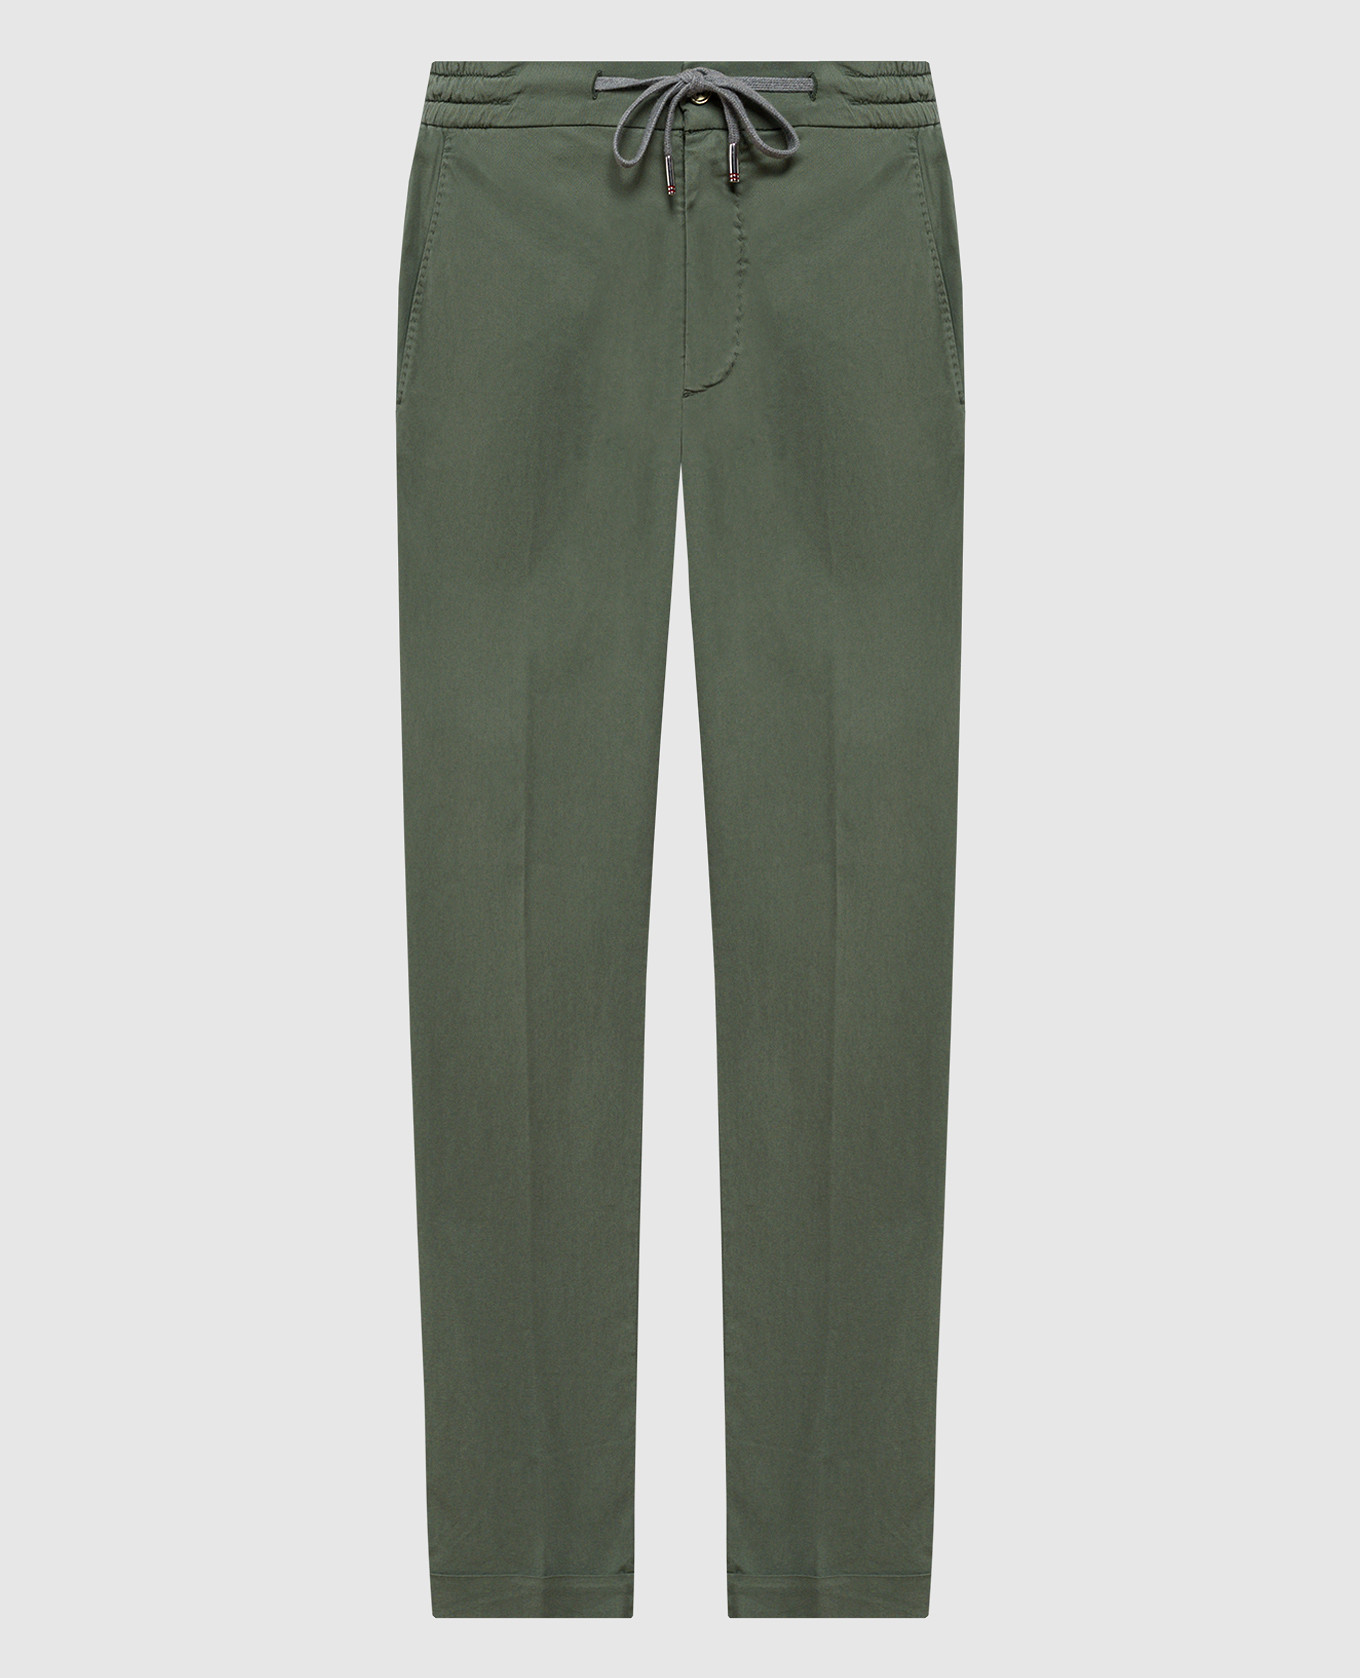 Green tapered trousers by Caracciolo